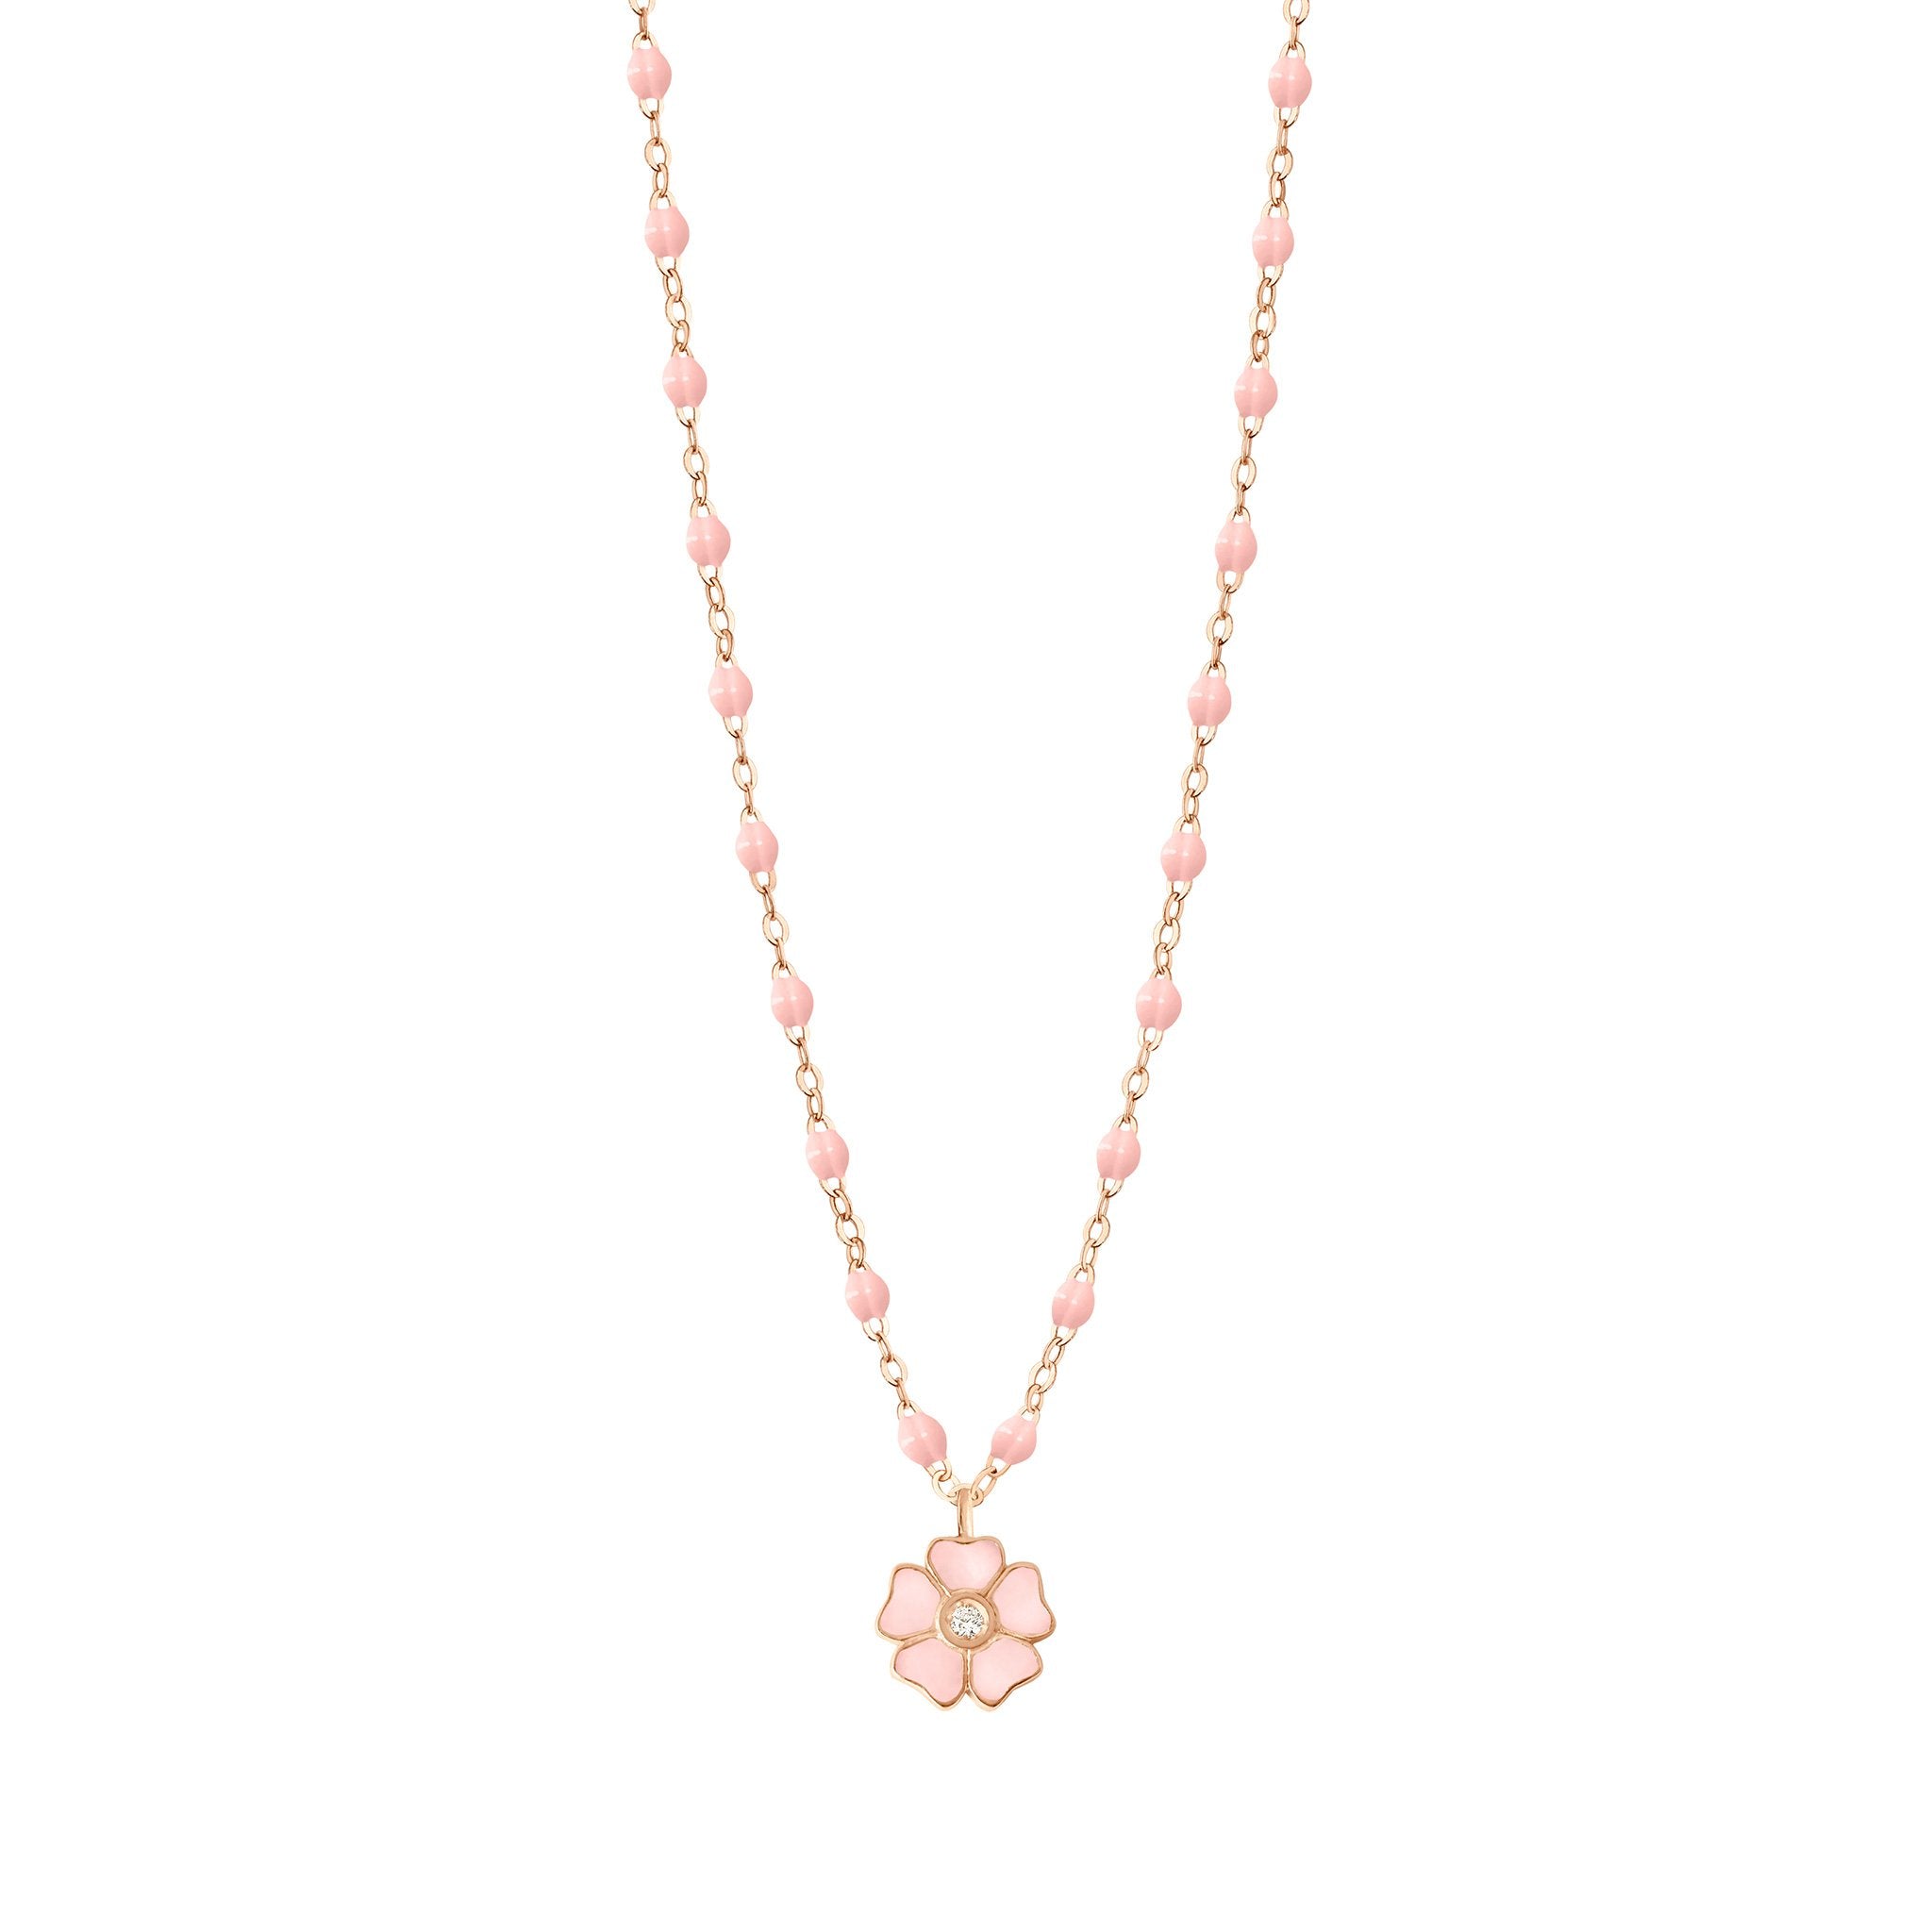 18K Pink Gold Diamond Pink Ceramic Heart Necklace with The Word Girl in Gold and The Diamond on Top of The I. 16.50 Inches with Extra Ring at 15 inch